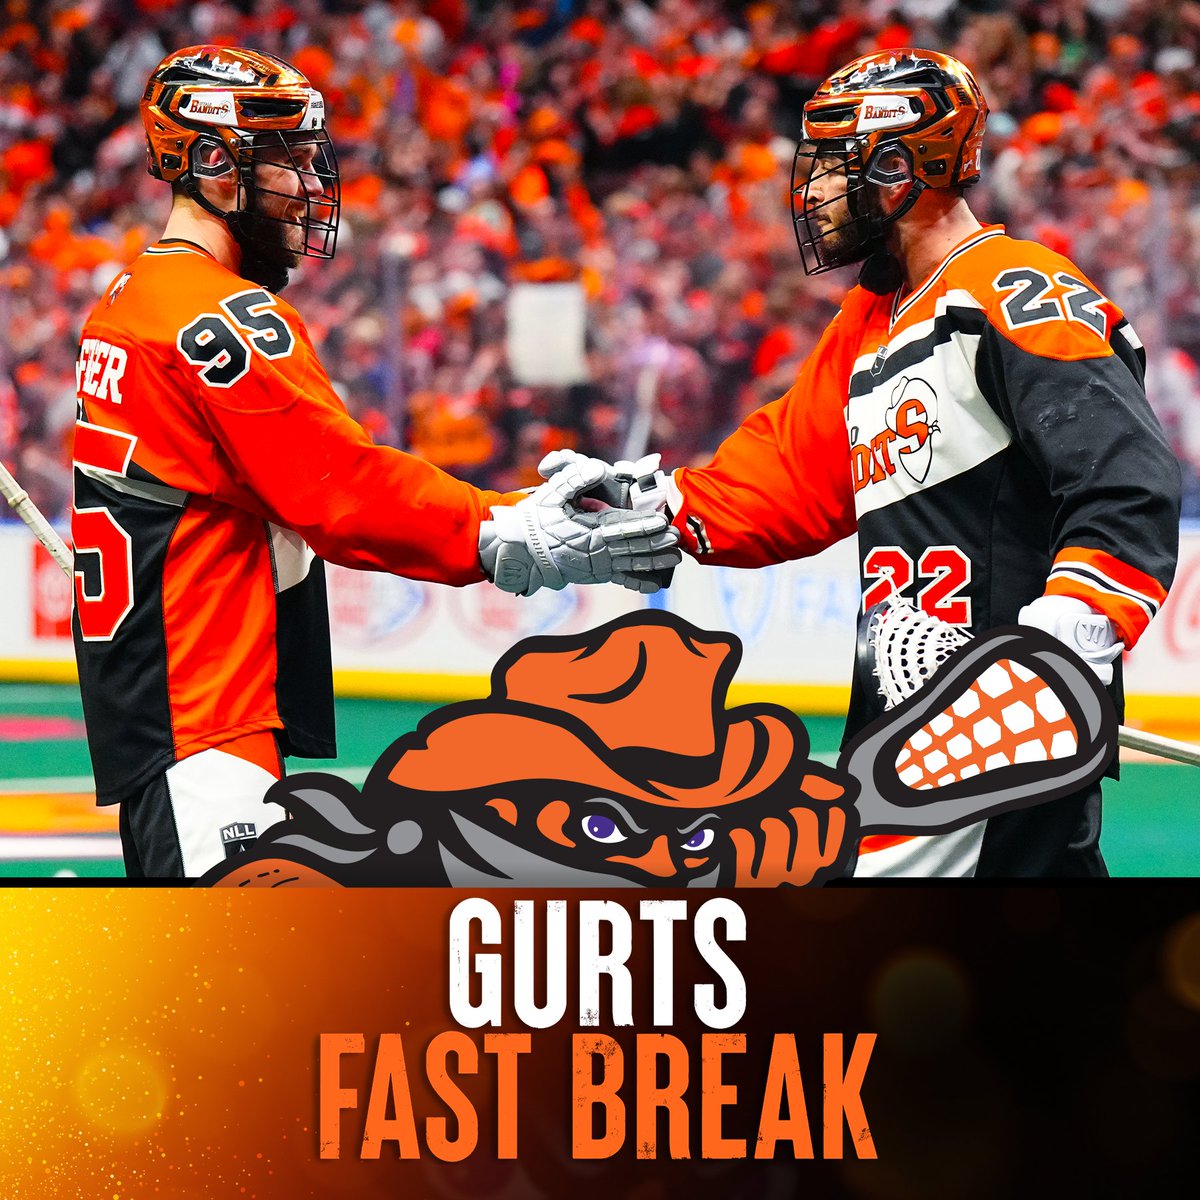 'Guys are hungry. We have a great balance of veterans and young guys. They buy into the system, and when you play as a team, not individuals, great things can happen.' Read Gurts Fast Break: bit.ly/3wtuOCu